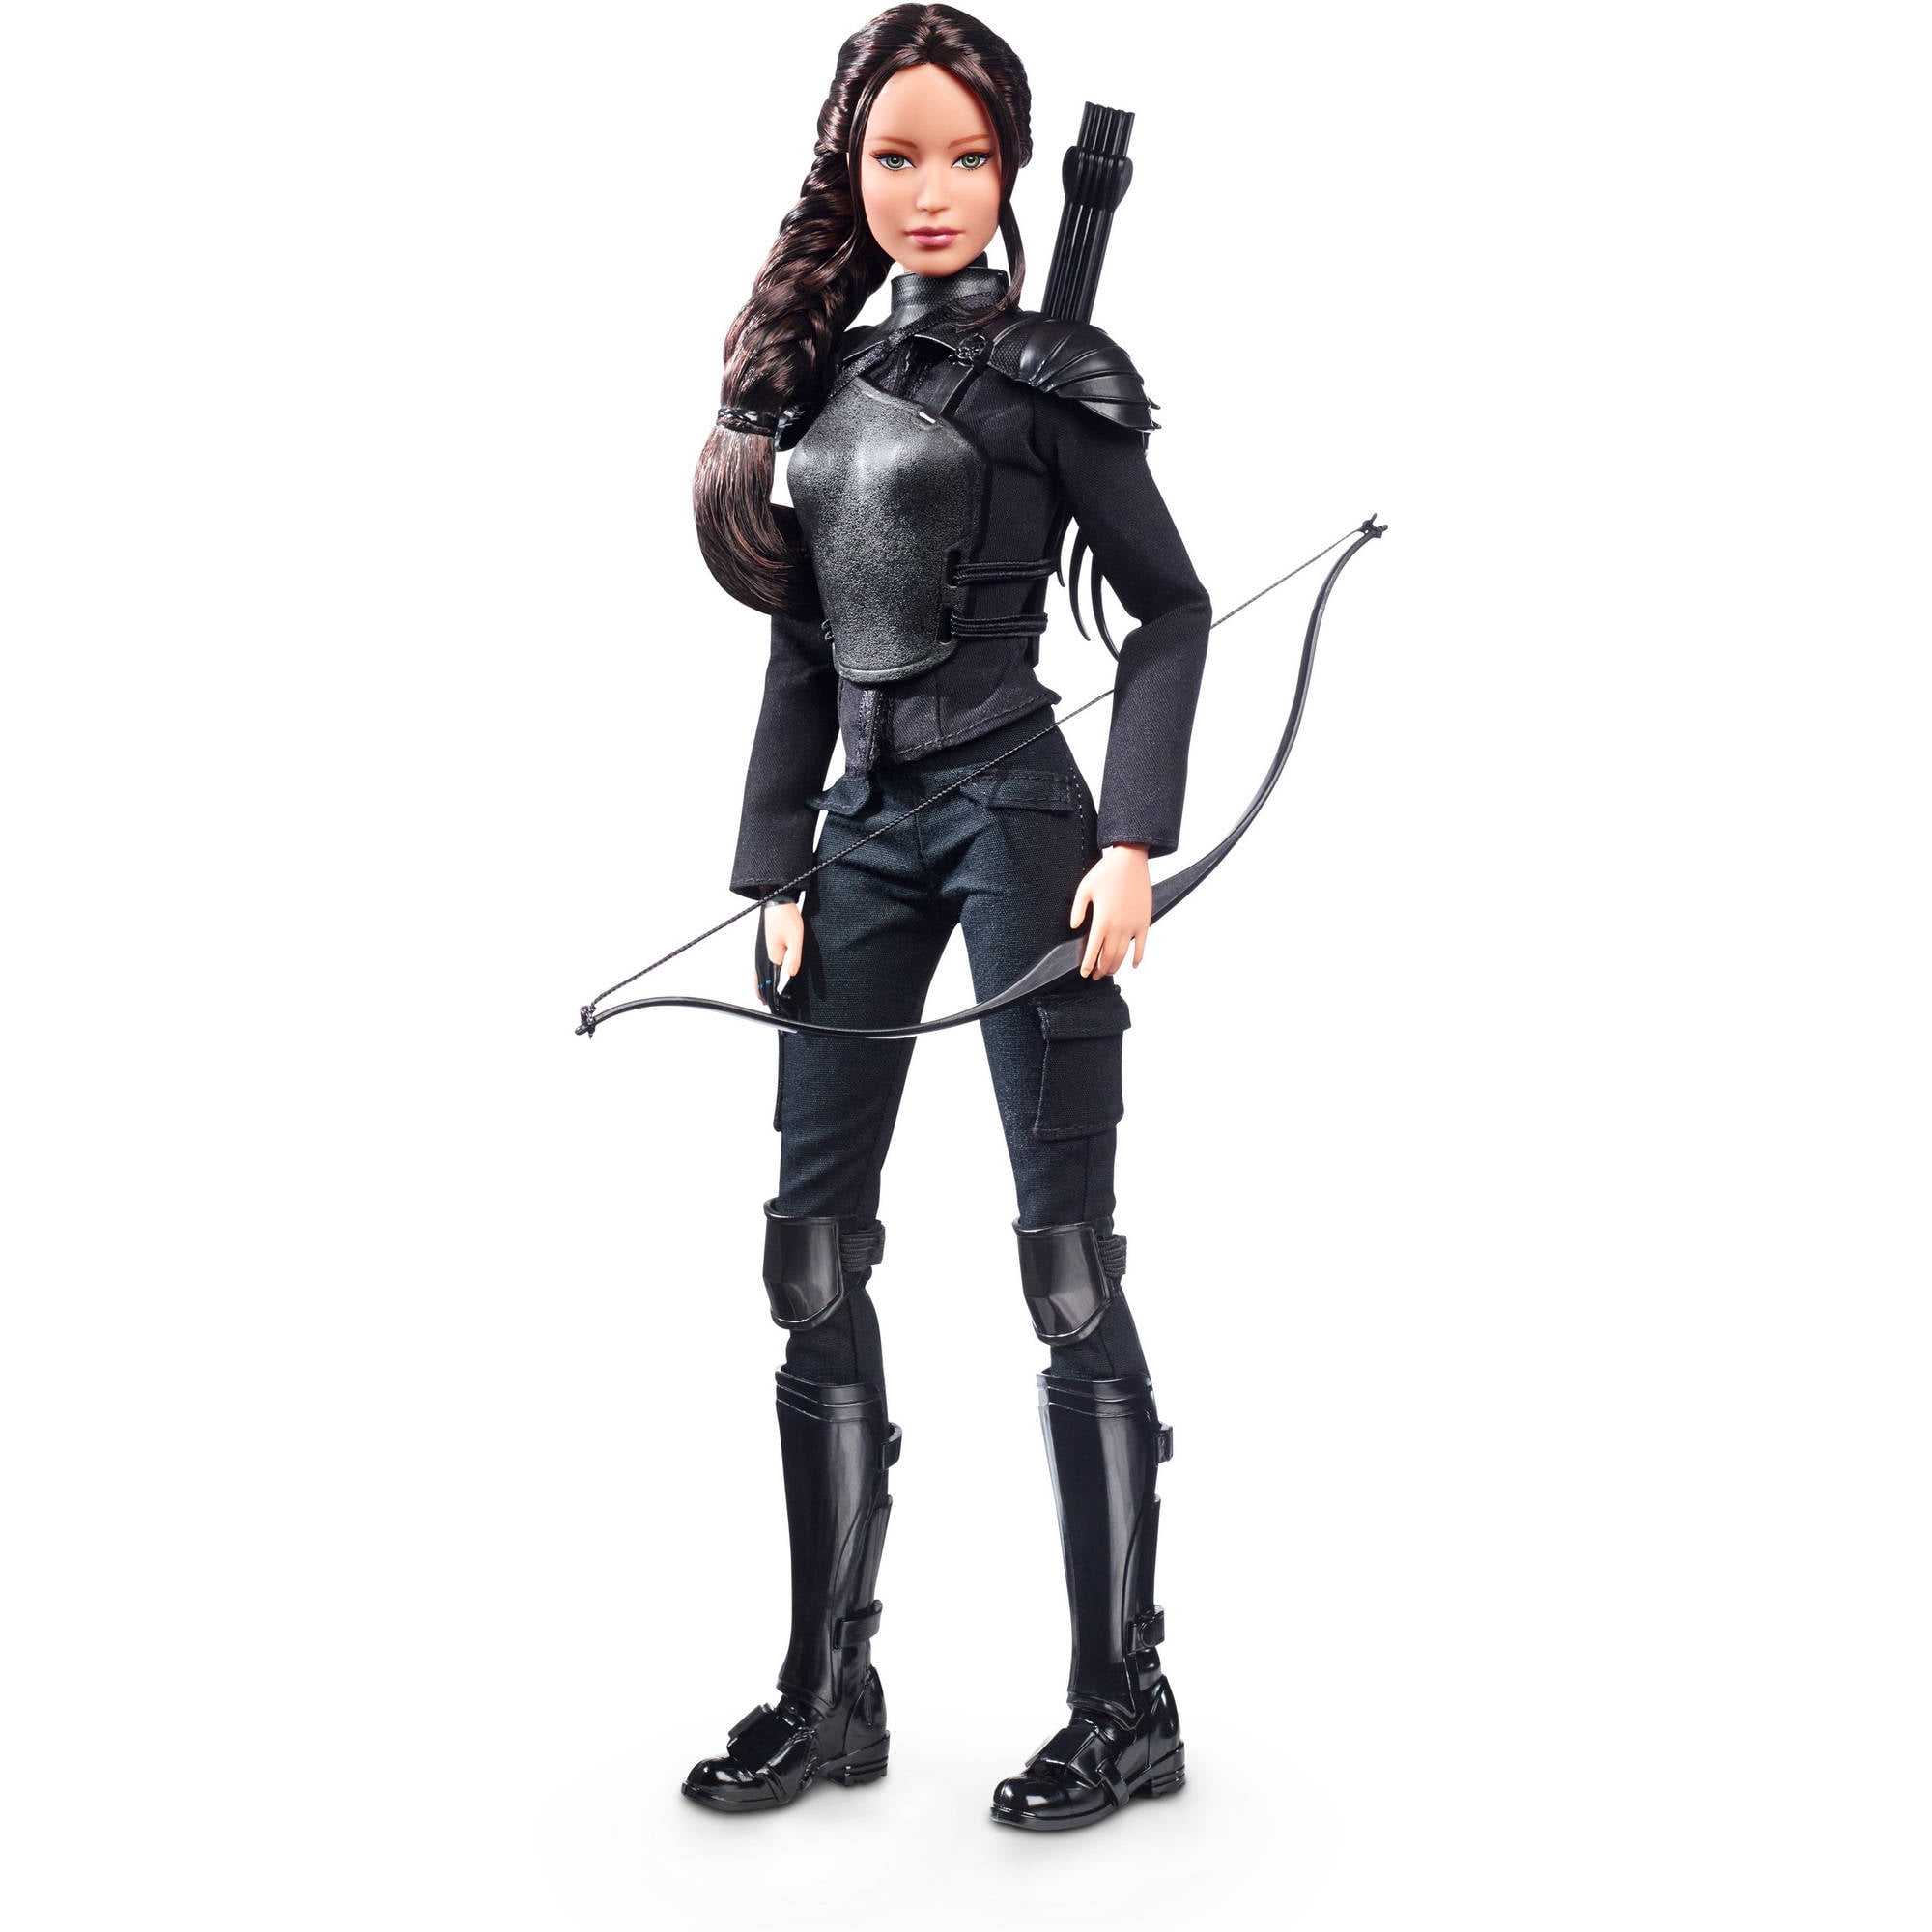 Barbie Hunger Games Mockingjay Part 2 Katniss  Outfit Fashion Shoes ONLY NO DOLL 